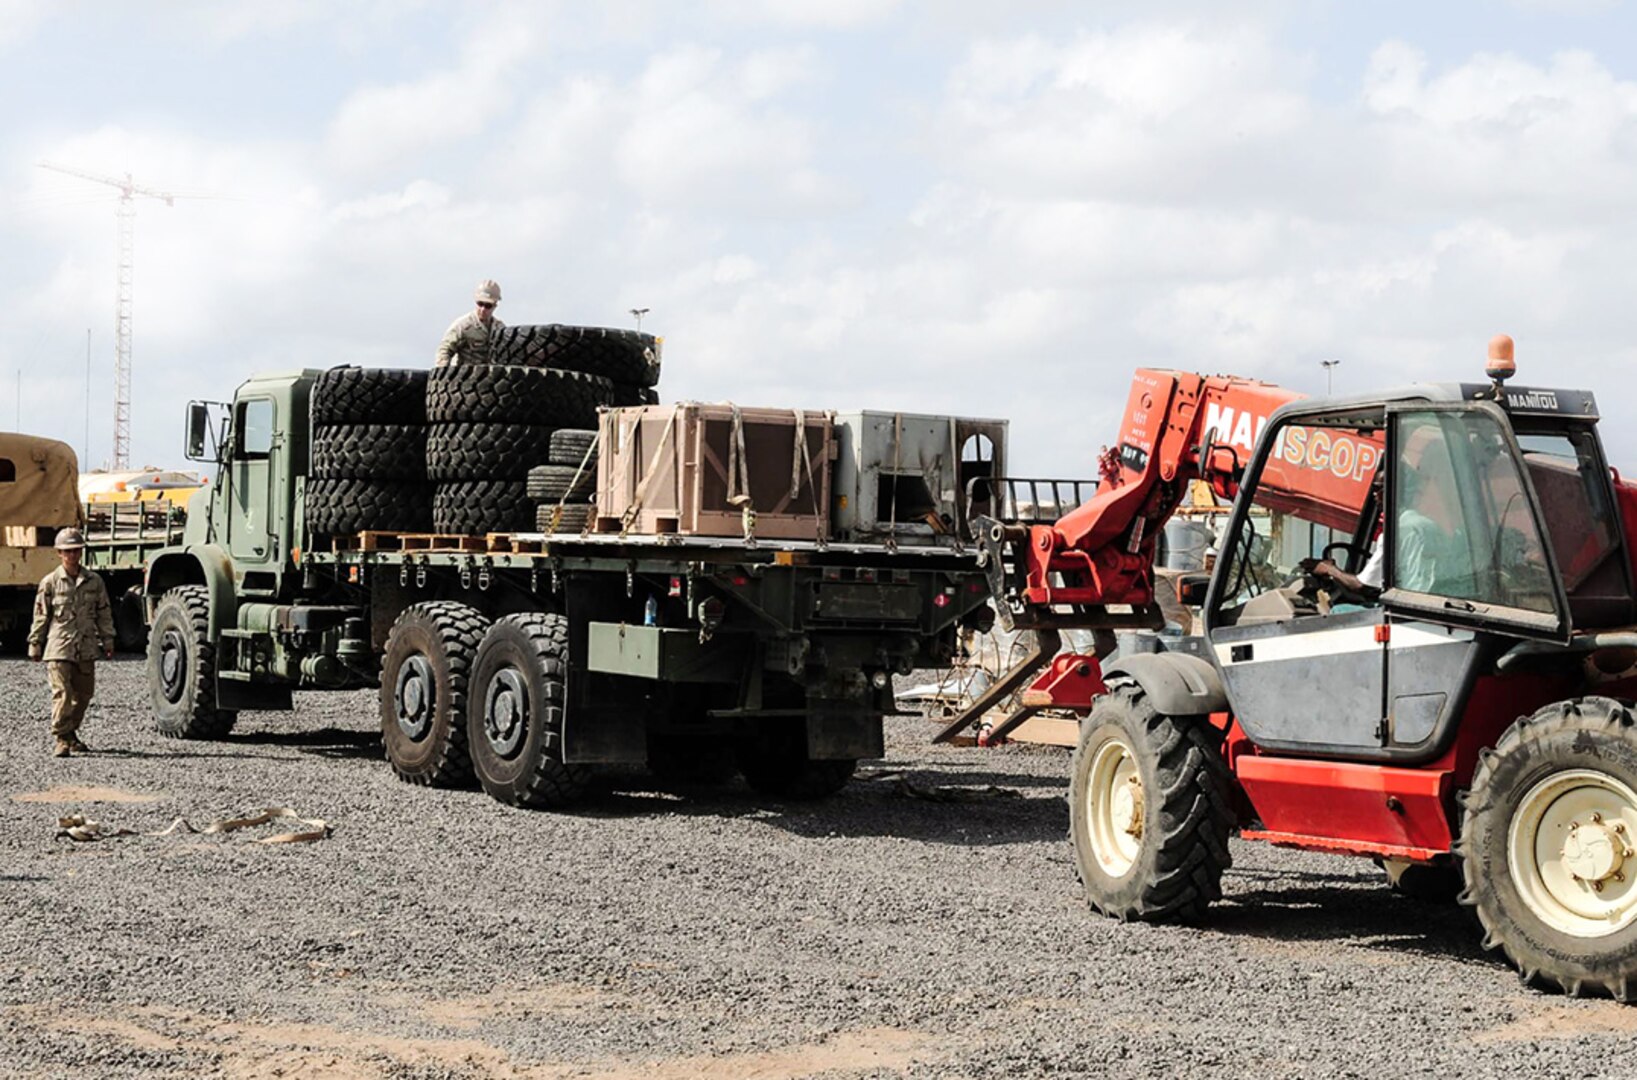 Personnel prepare to unload excess and scrap tires and equipment on Camp Lemonnier, Djibouti, Oct. 16. The camp is undertaking a first-ever massive cleanup effort to reduce excess and scrap material on the base with the support of the Defense Reutilization & Marketing Service.